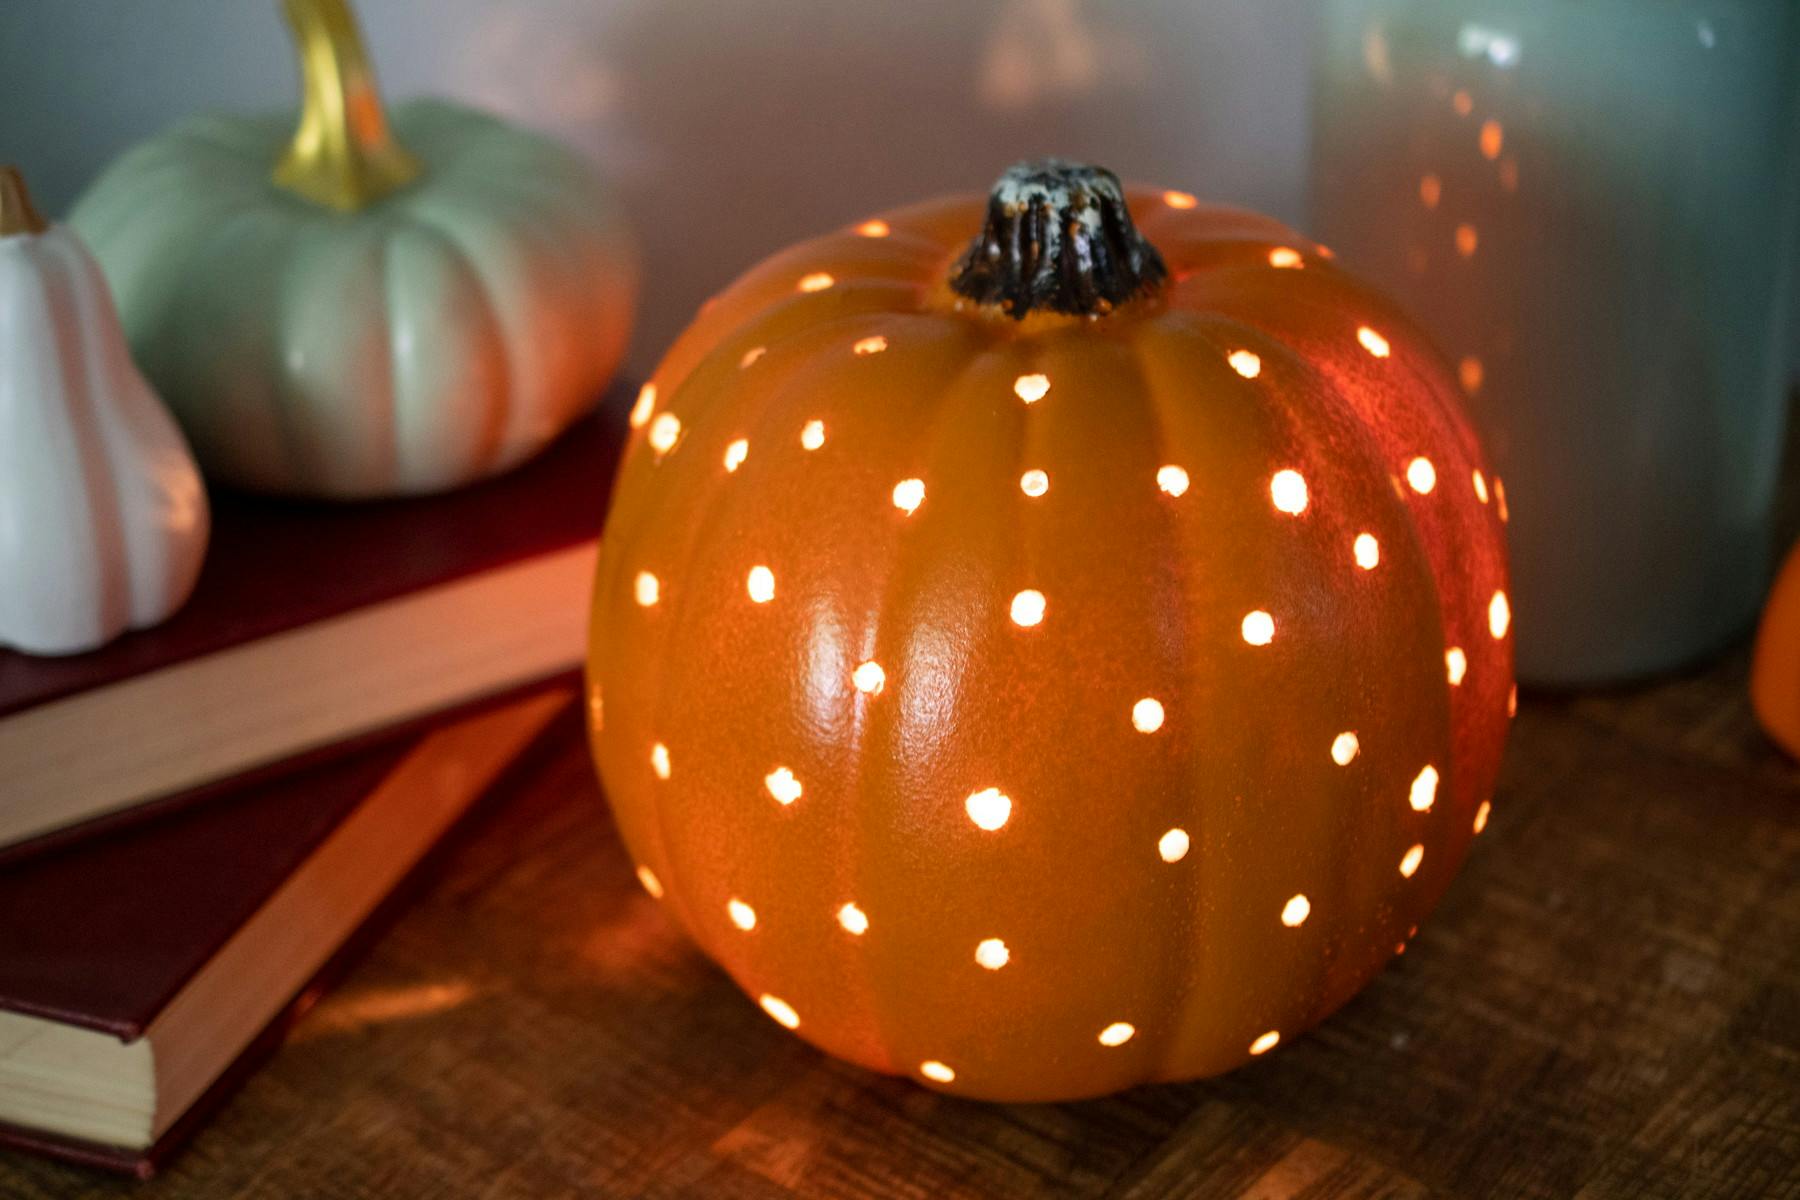 A plastic pumpkin with small drill holes all over it, and light shining through.